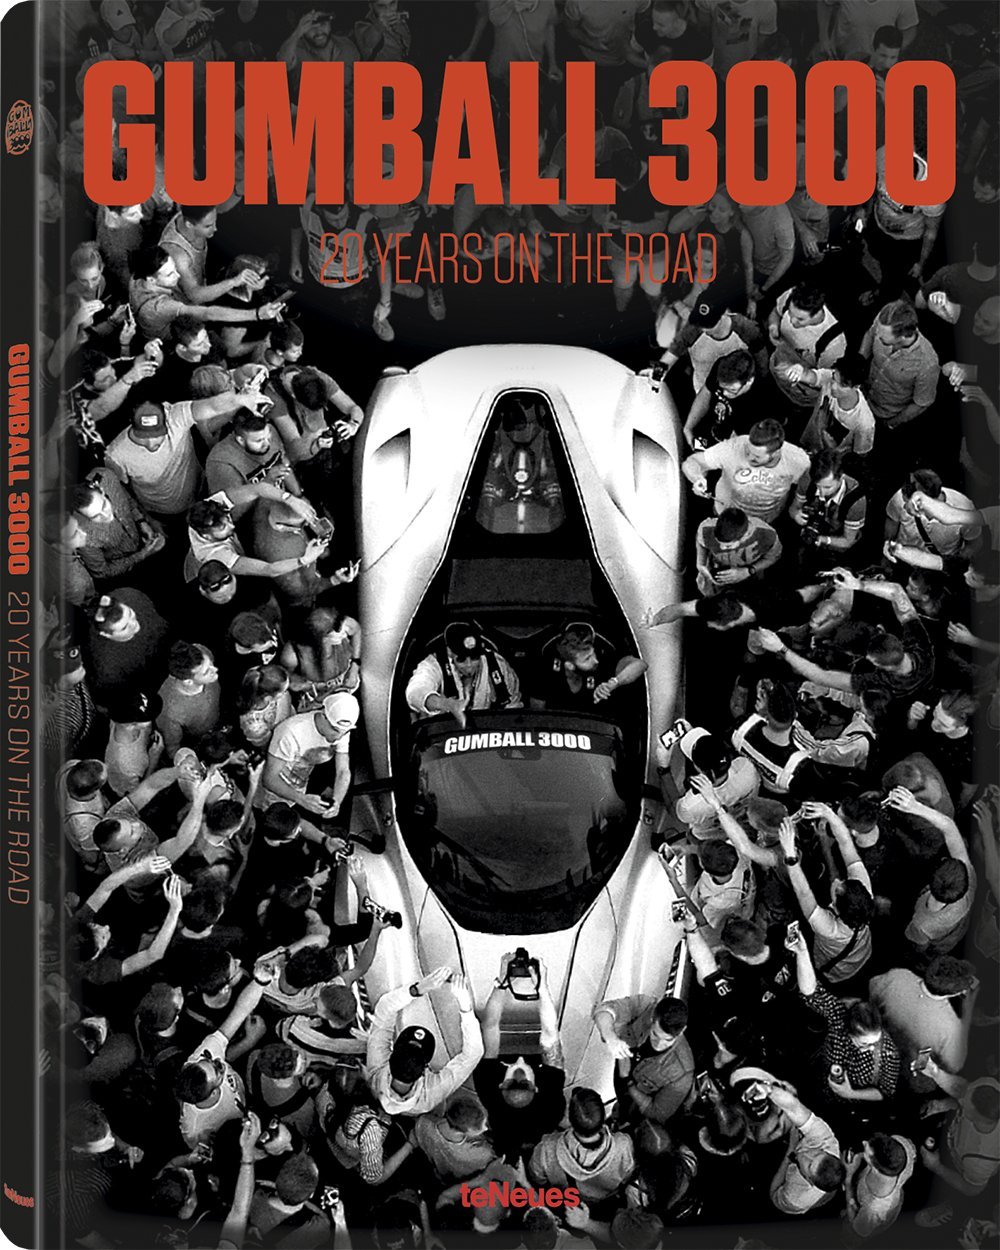 Gumball 3000 - 20 Years on the Road